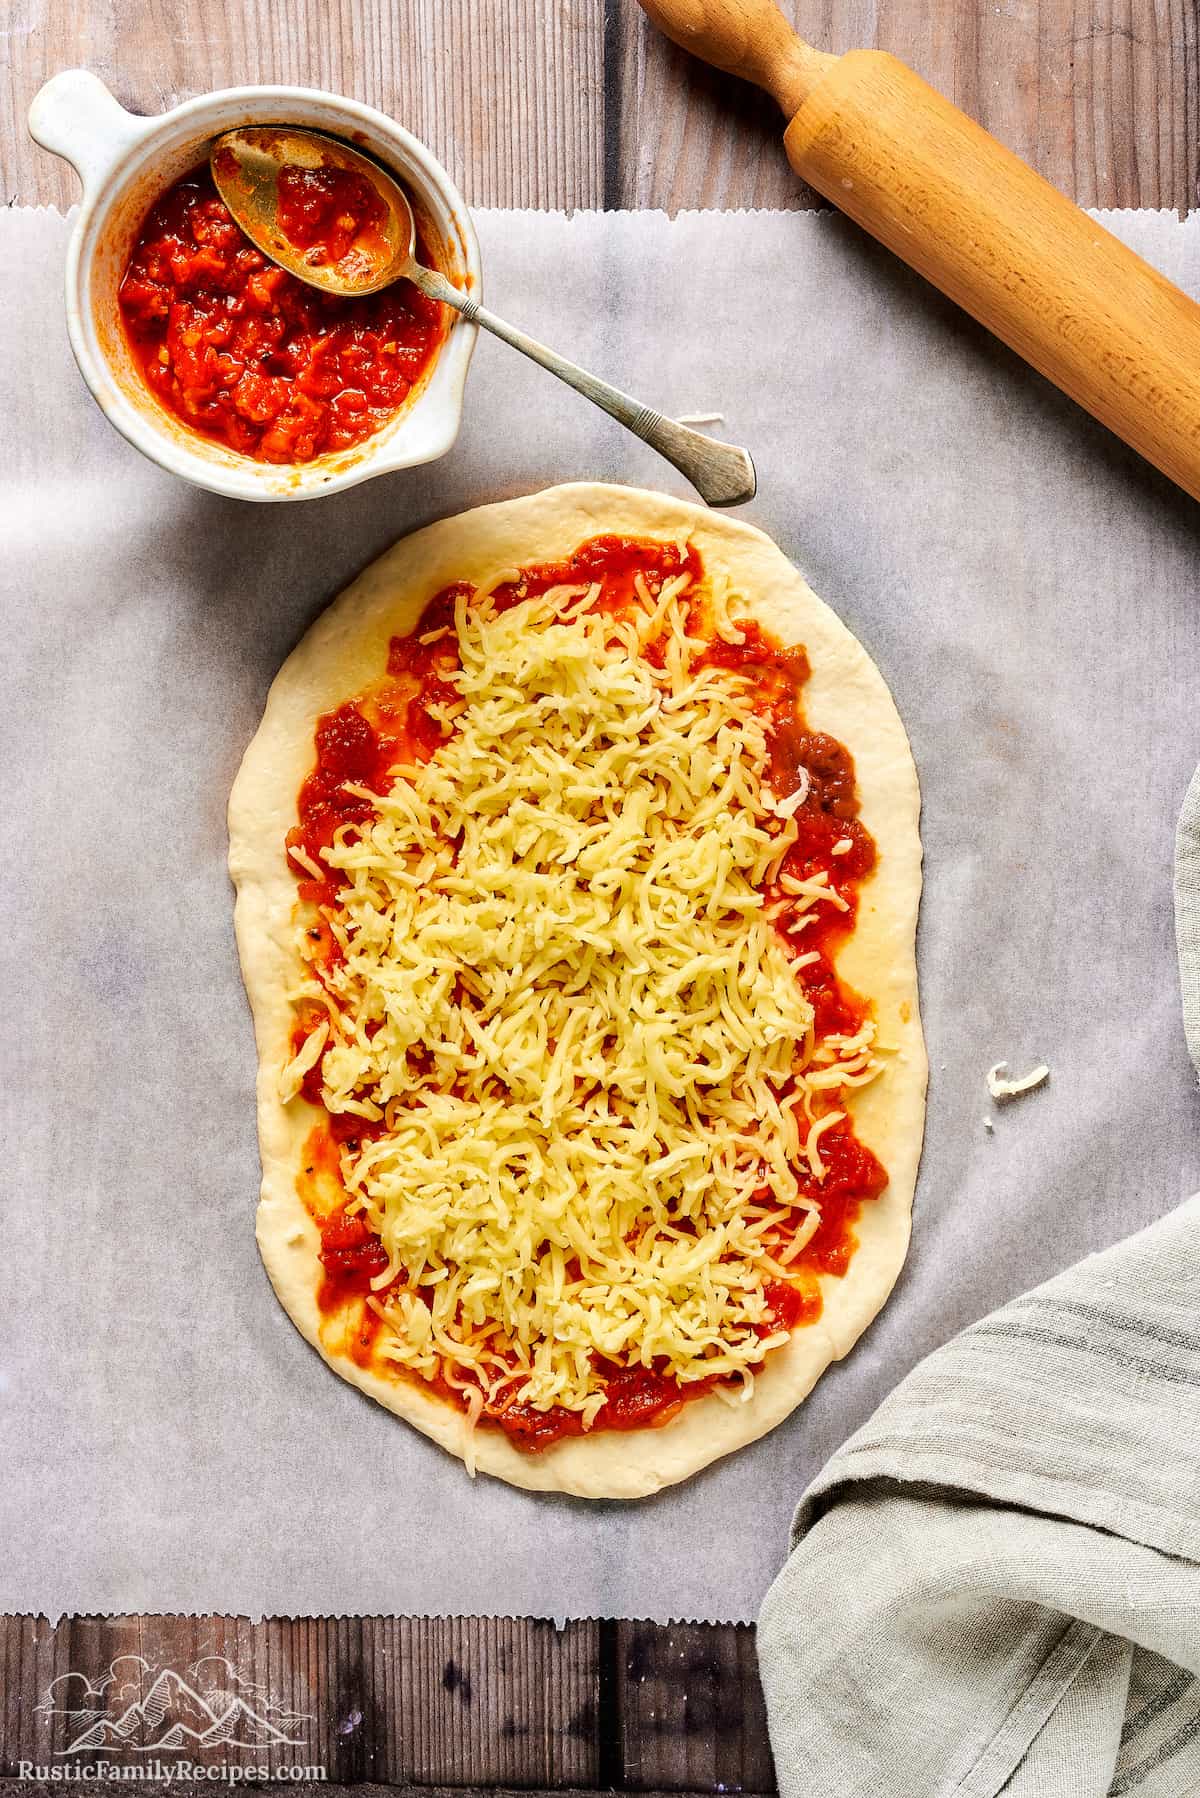 Rolled out pizza dough with sauce and cheese